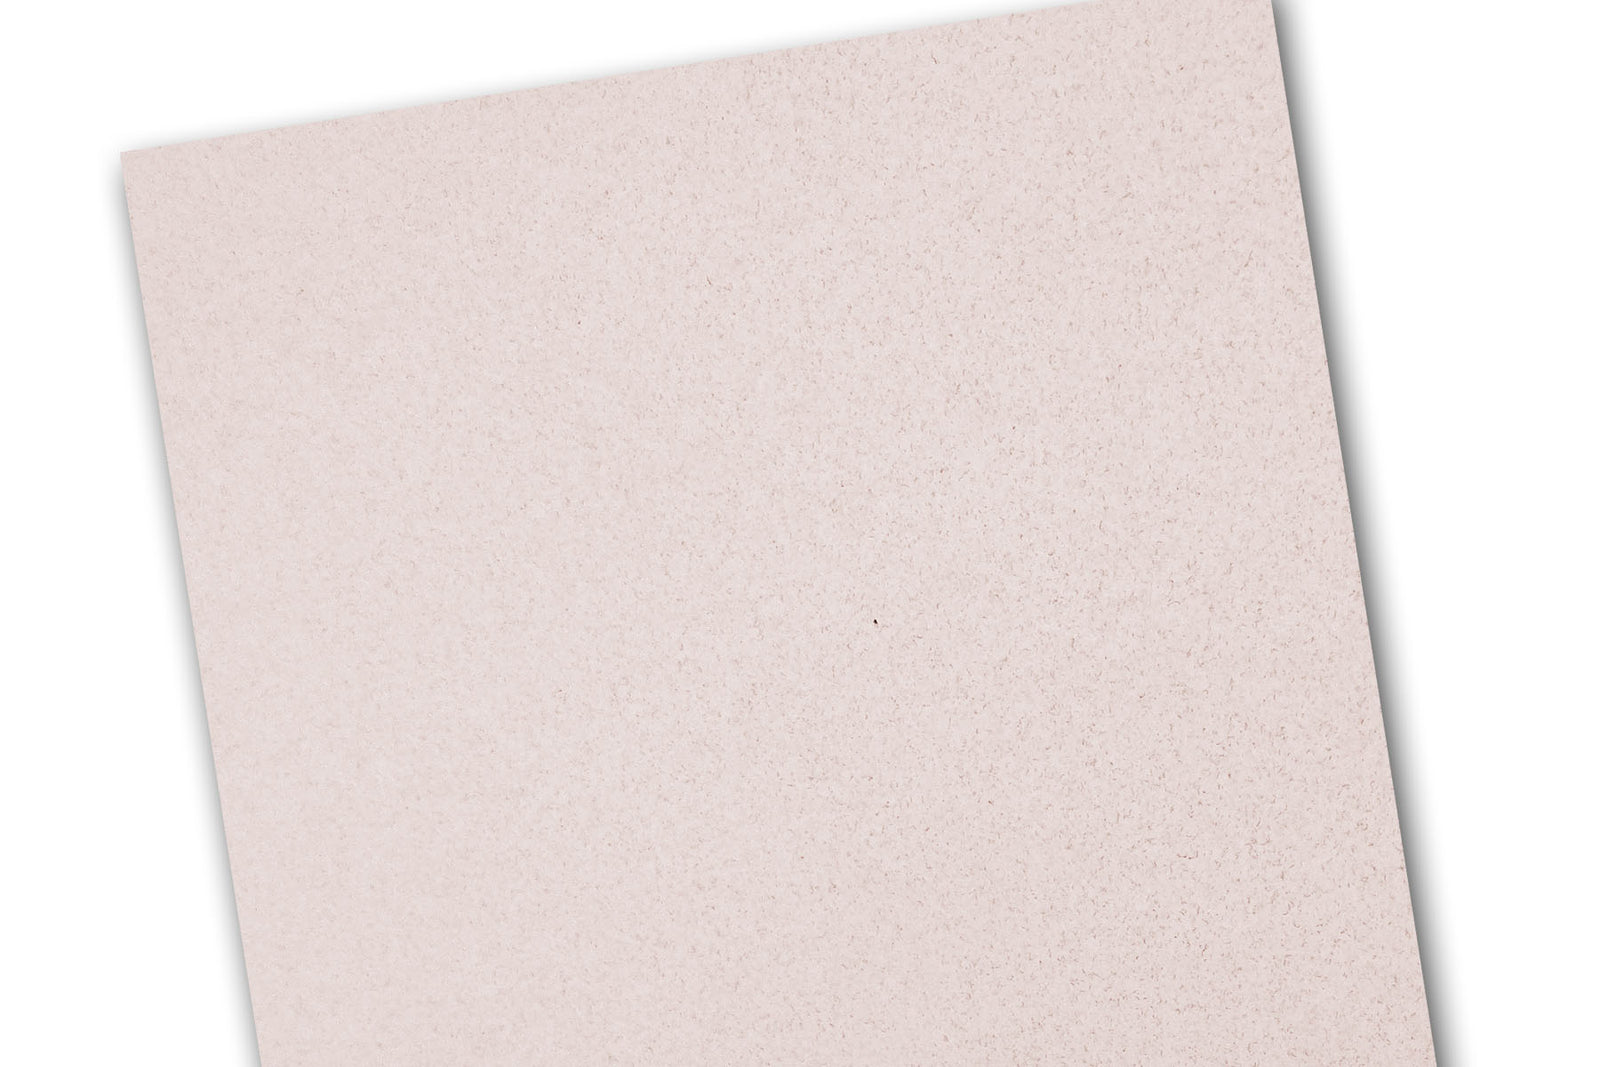 Barely Pink Card Stock - 8 1/2 x 11 in 80 lb Cover Smooth